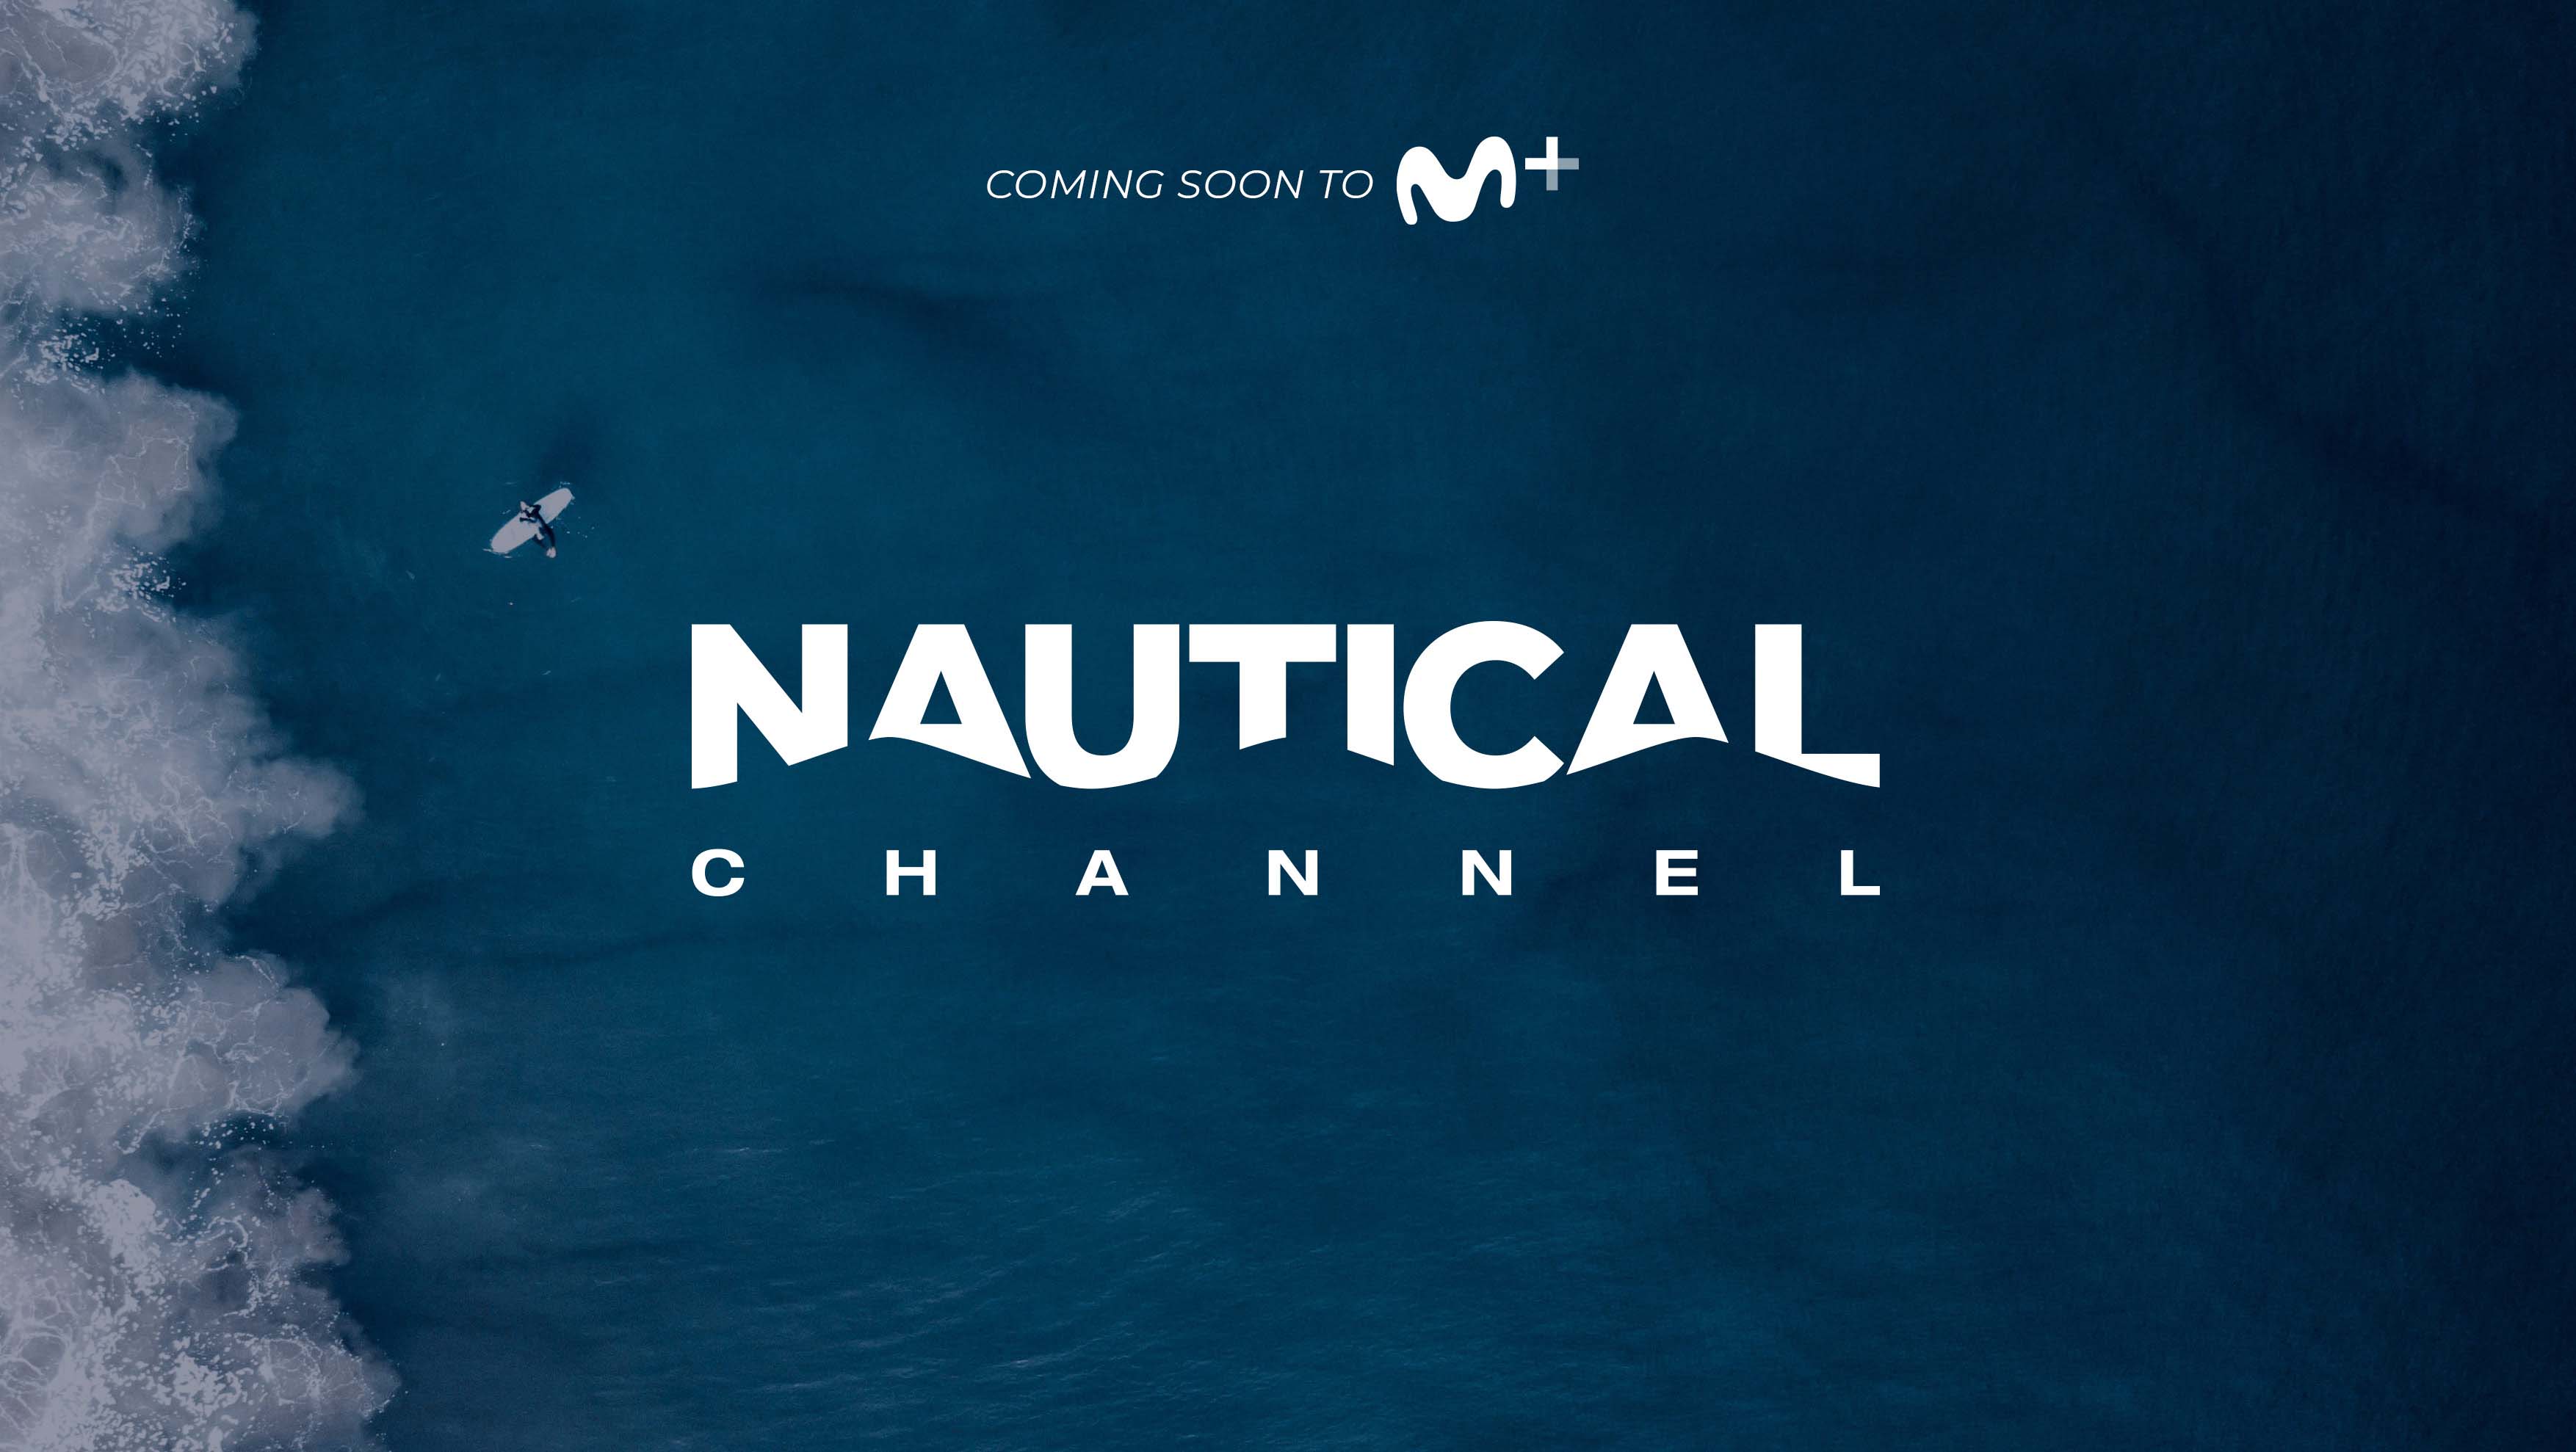 Nautical Channel arrives for the first time to Spain with Movistar +